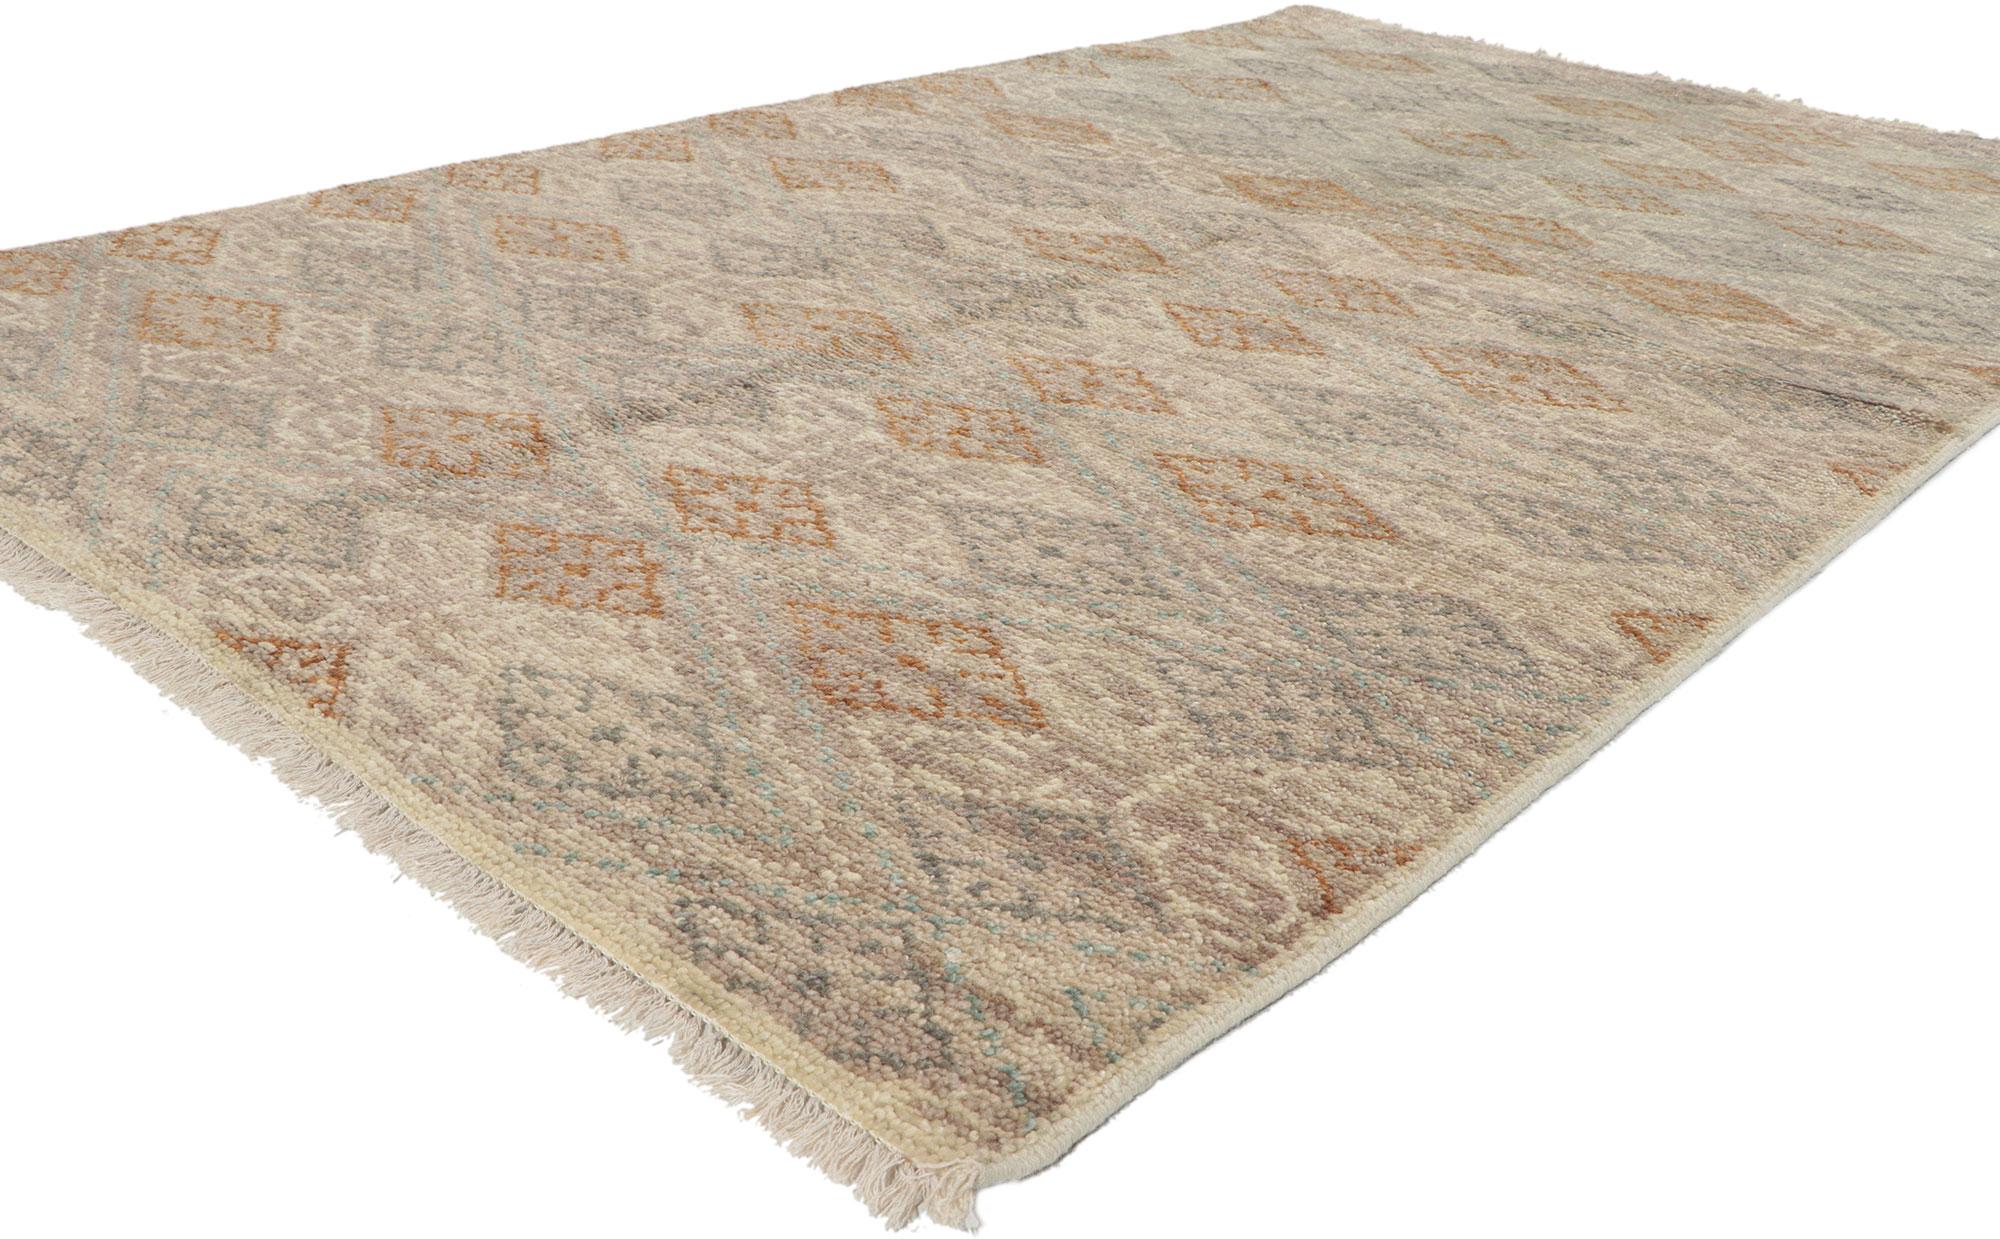 30490 New Earth-Tone Transitional Area Rug, 04'11 x 07'11. 
Emanating modern style with incredible detail and texture, this hand knotted wool transitional area rug is a captivating vision of woven beauty. The allover pattern and earthy colorway